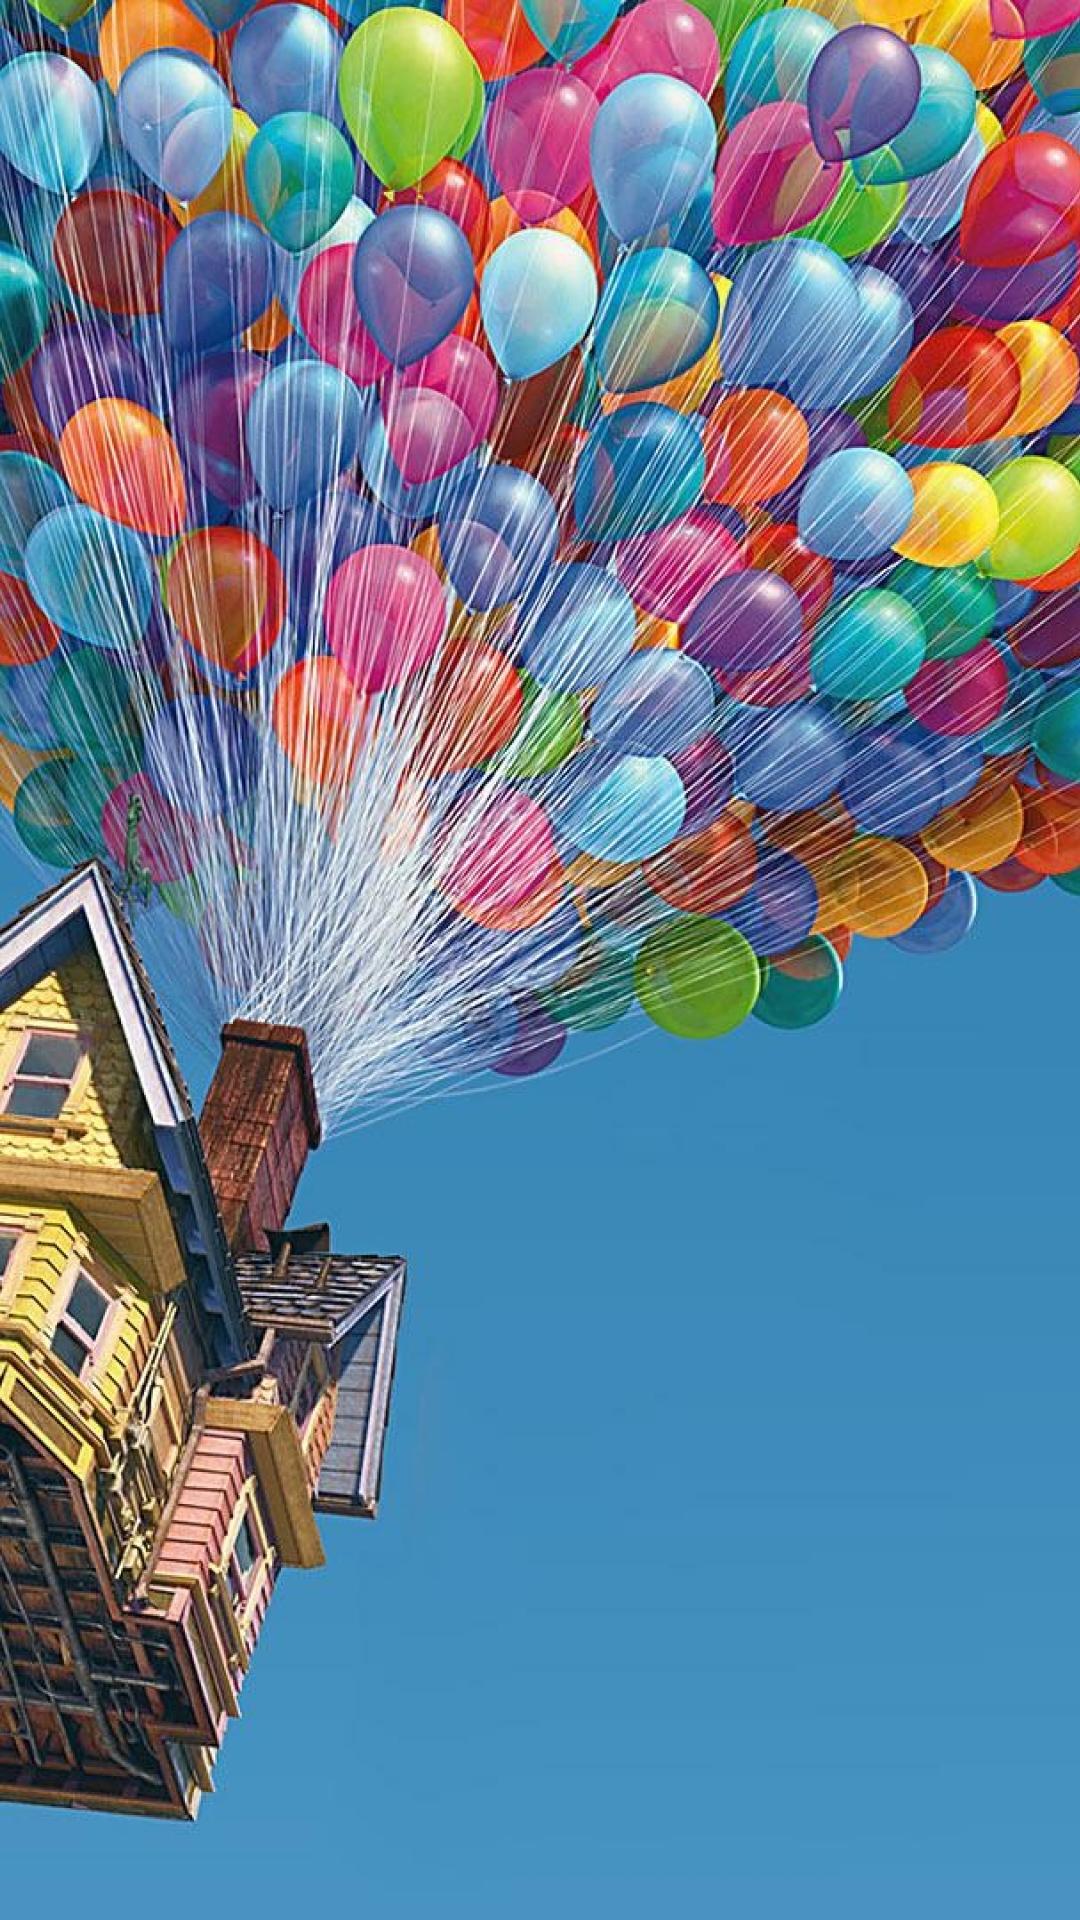 Up movie balloons wallpaper for galaxy s5. The best wallpaper